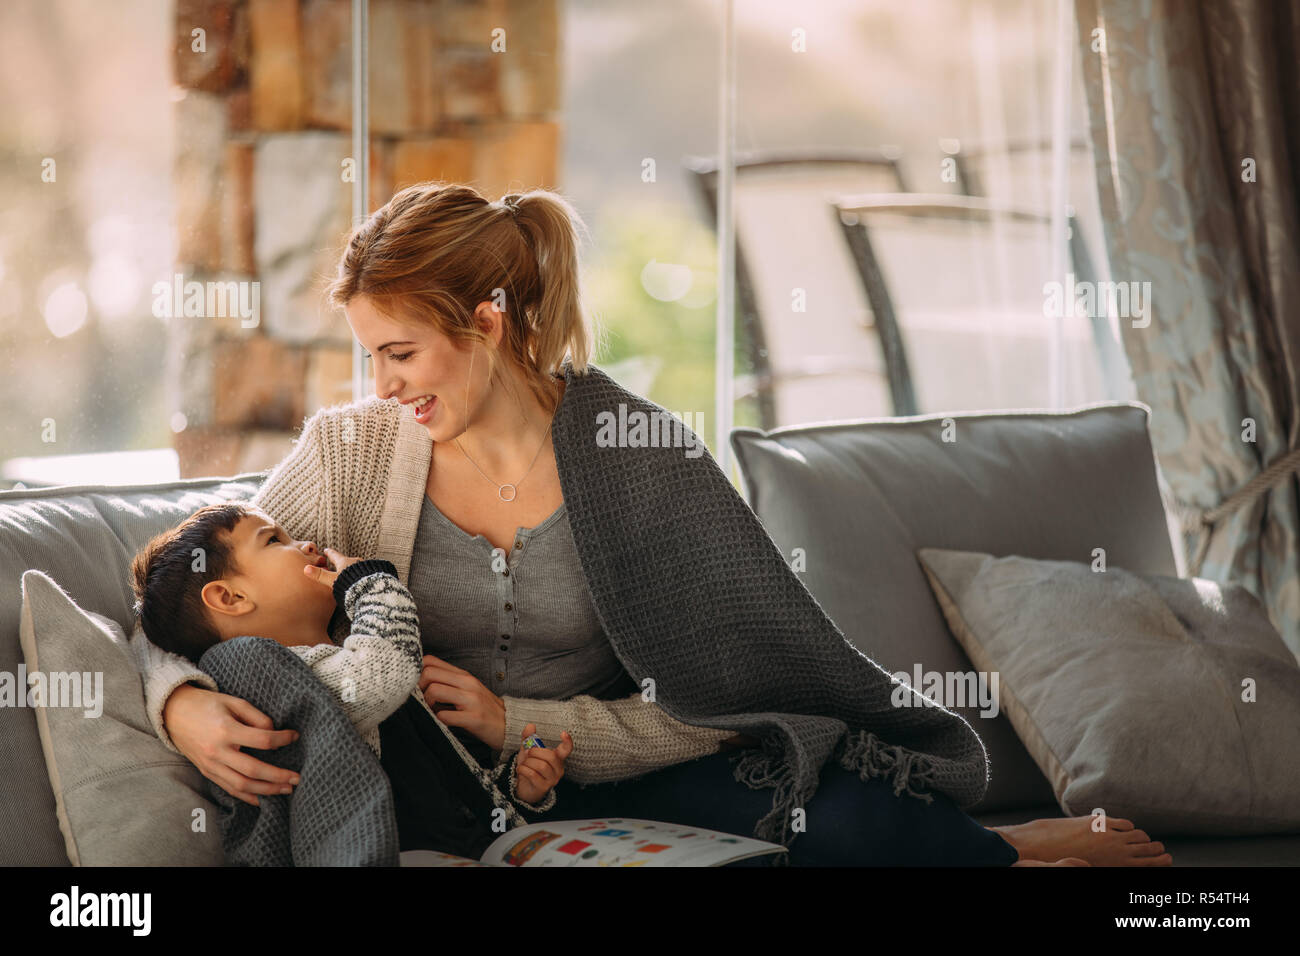 Little boy touching his mouth and looking at his mother sitting on sofa. Mother and son having fun time together at home. Stock Photo